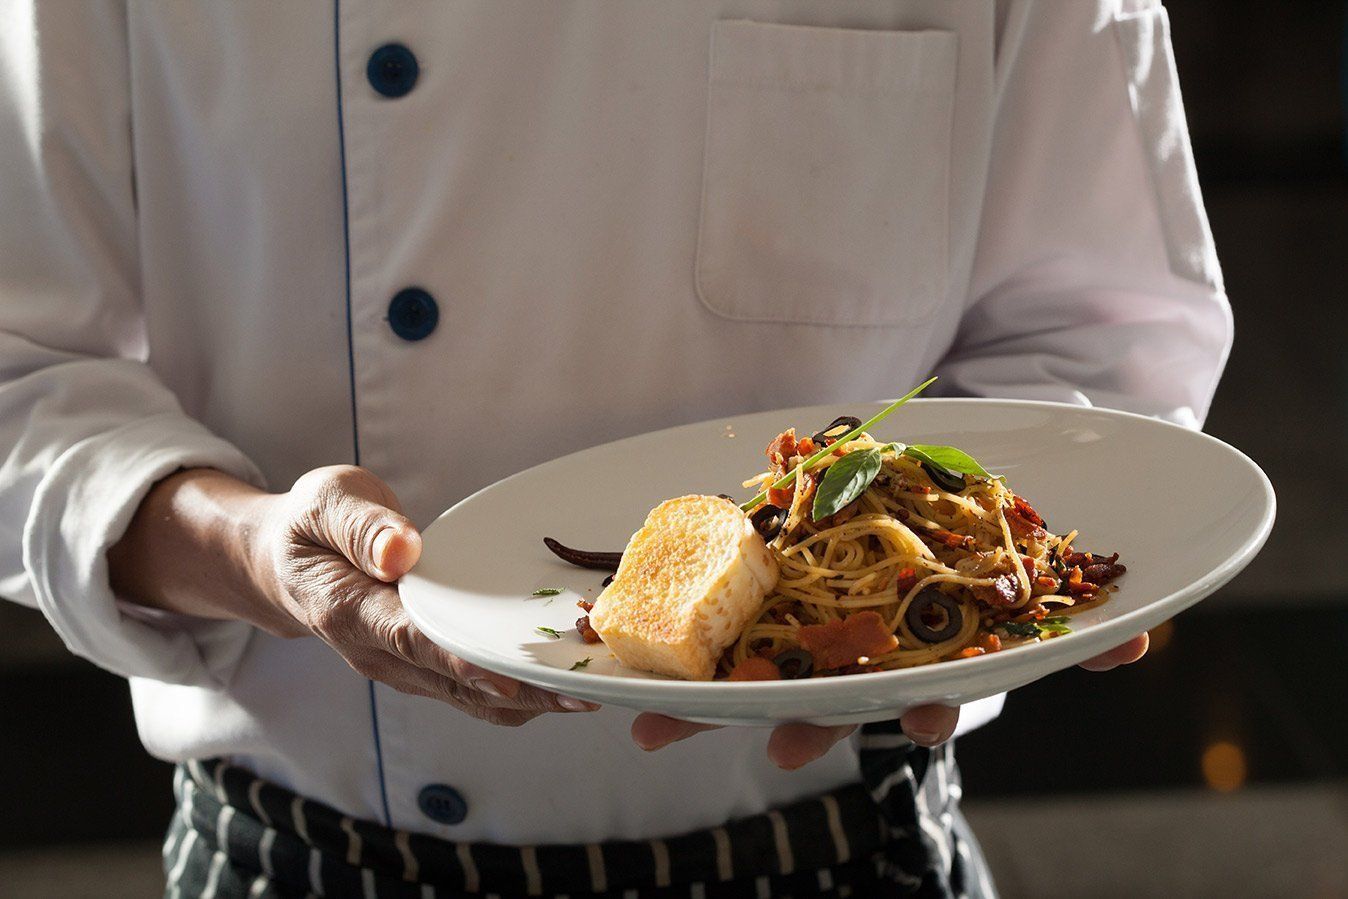 A chef holding a plate of food